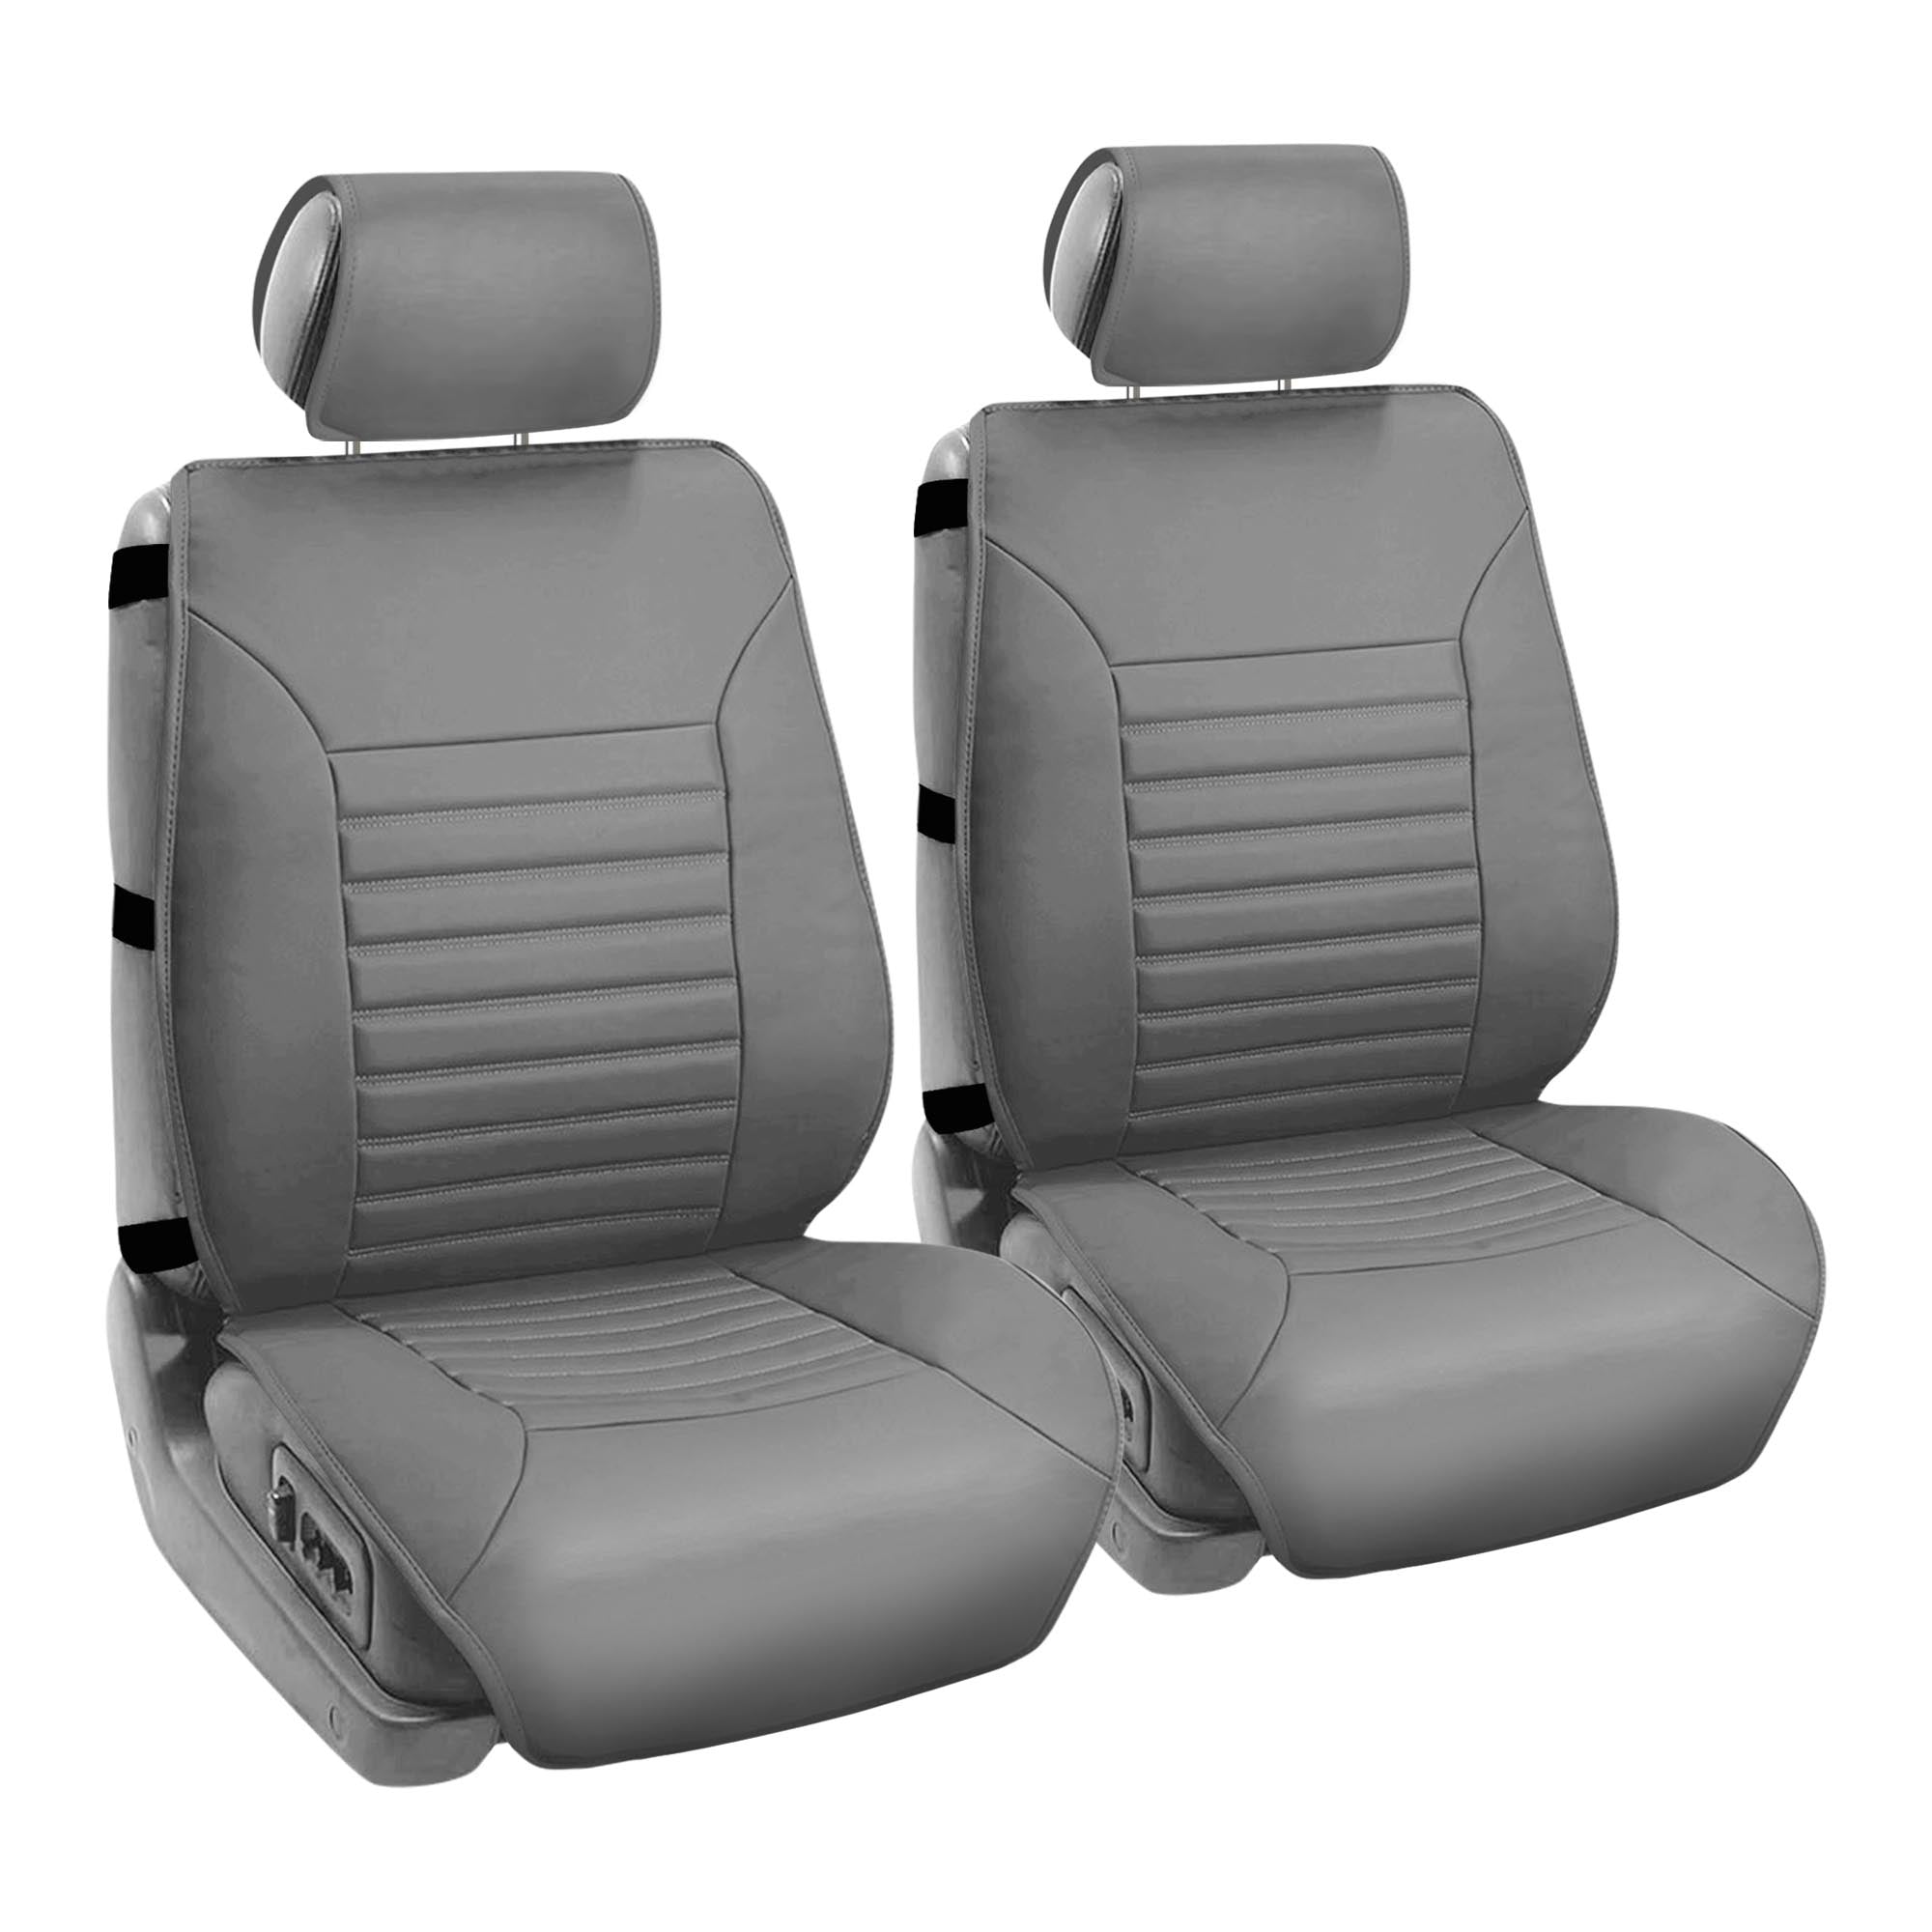 Multifunctional Quilted Leather Seat Cushions - Gray